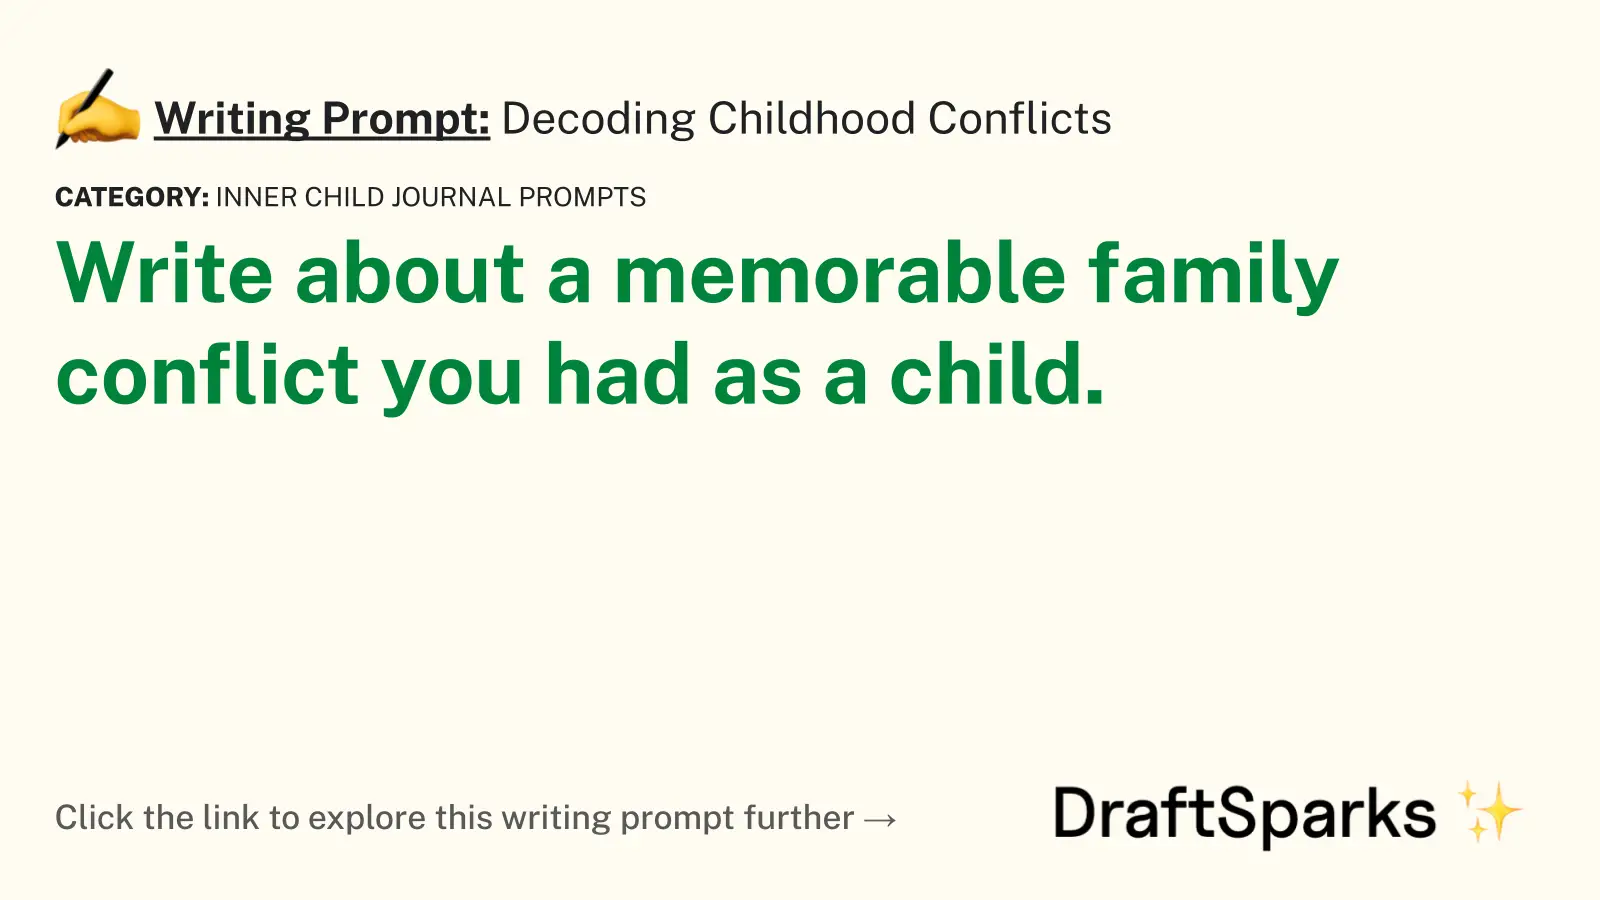 Decoding Childhood Conflicts